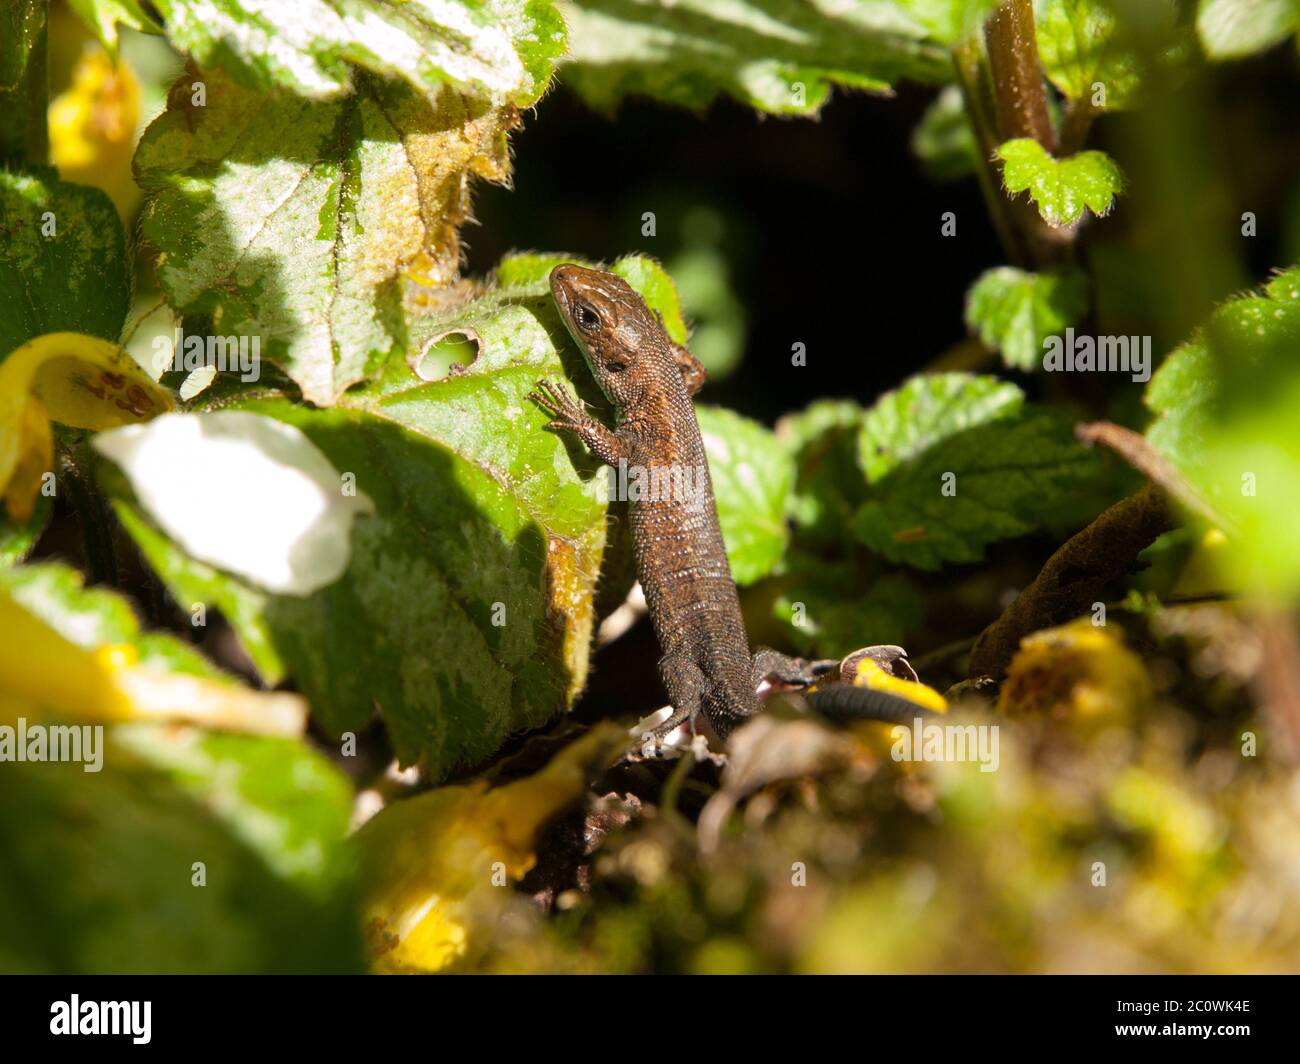 Grass lizard climbing on the green leaf in the garden, detailed view Stock Photo